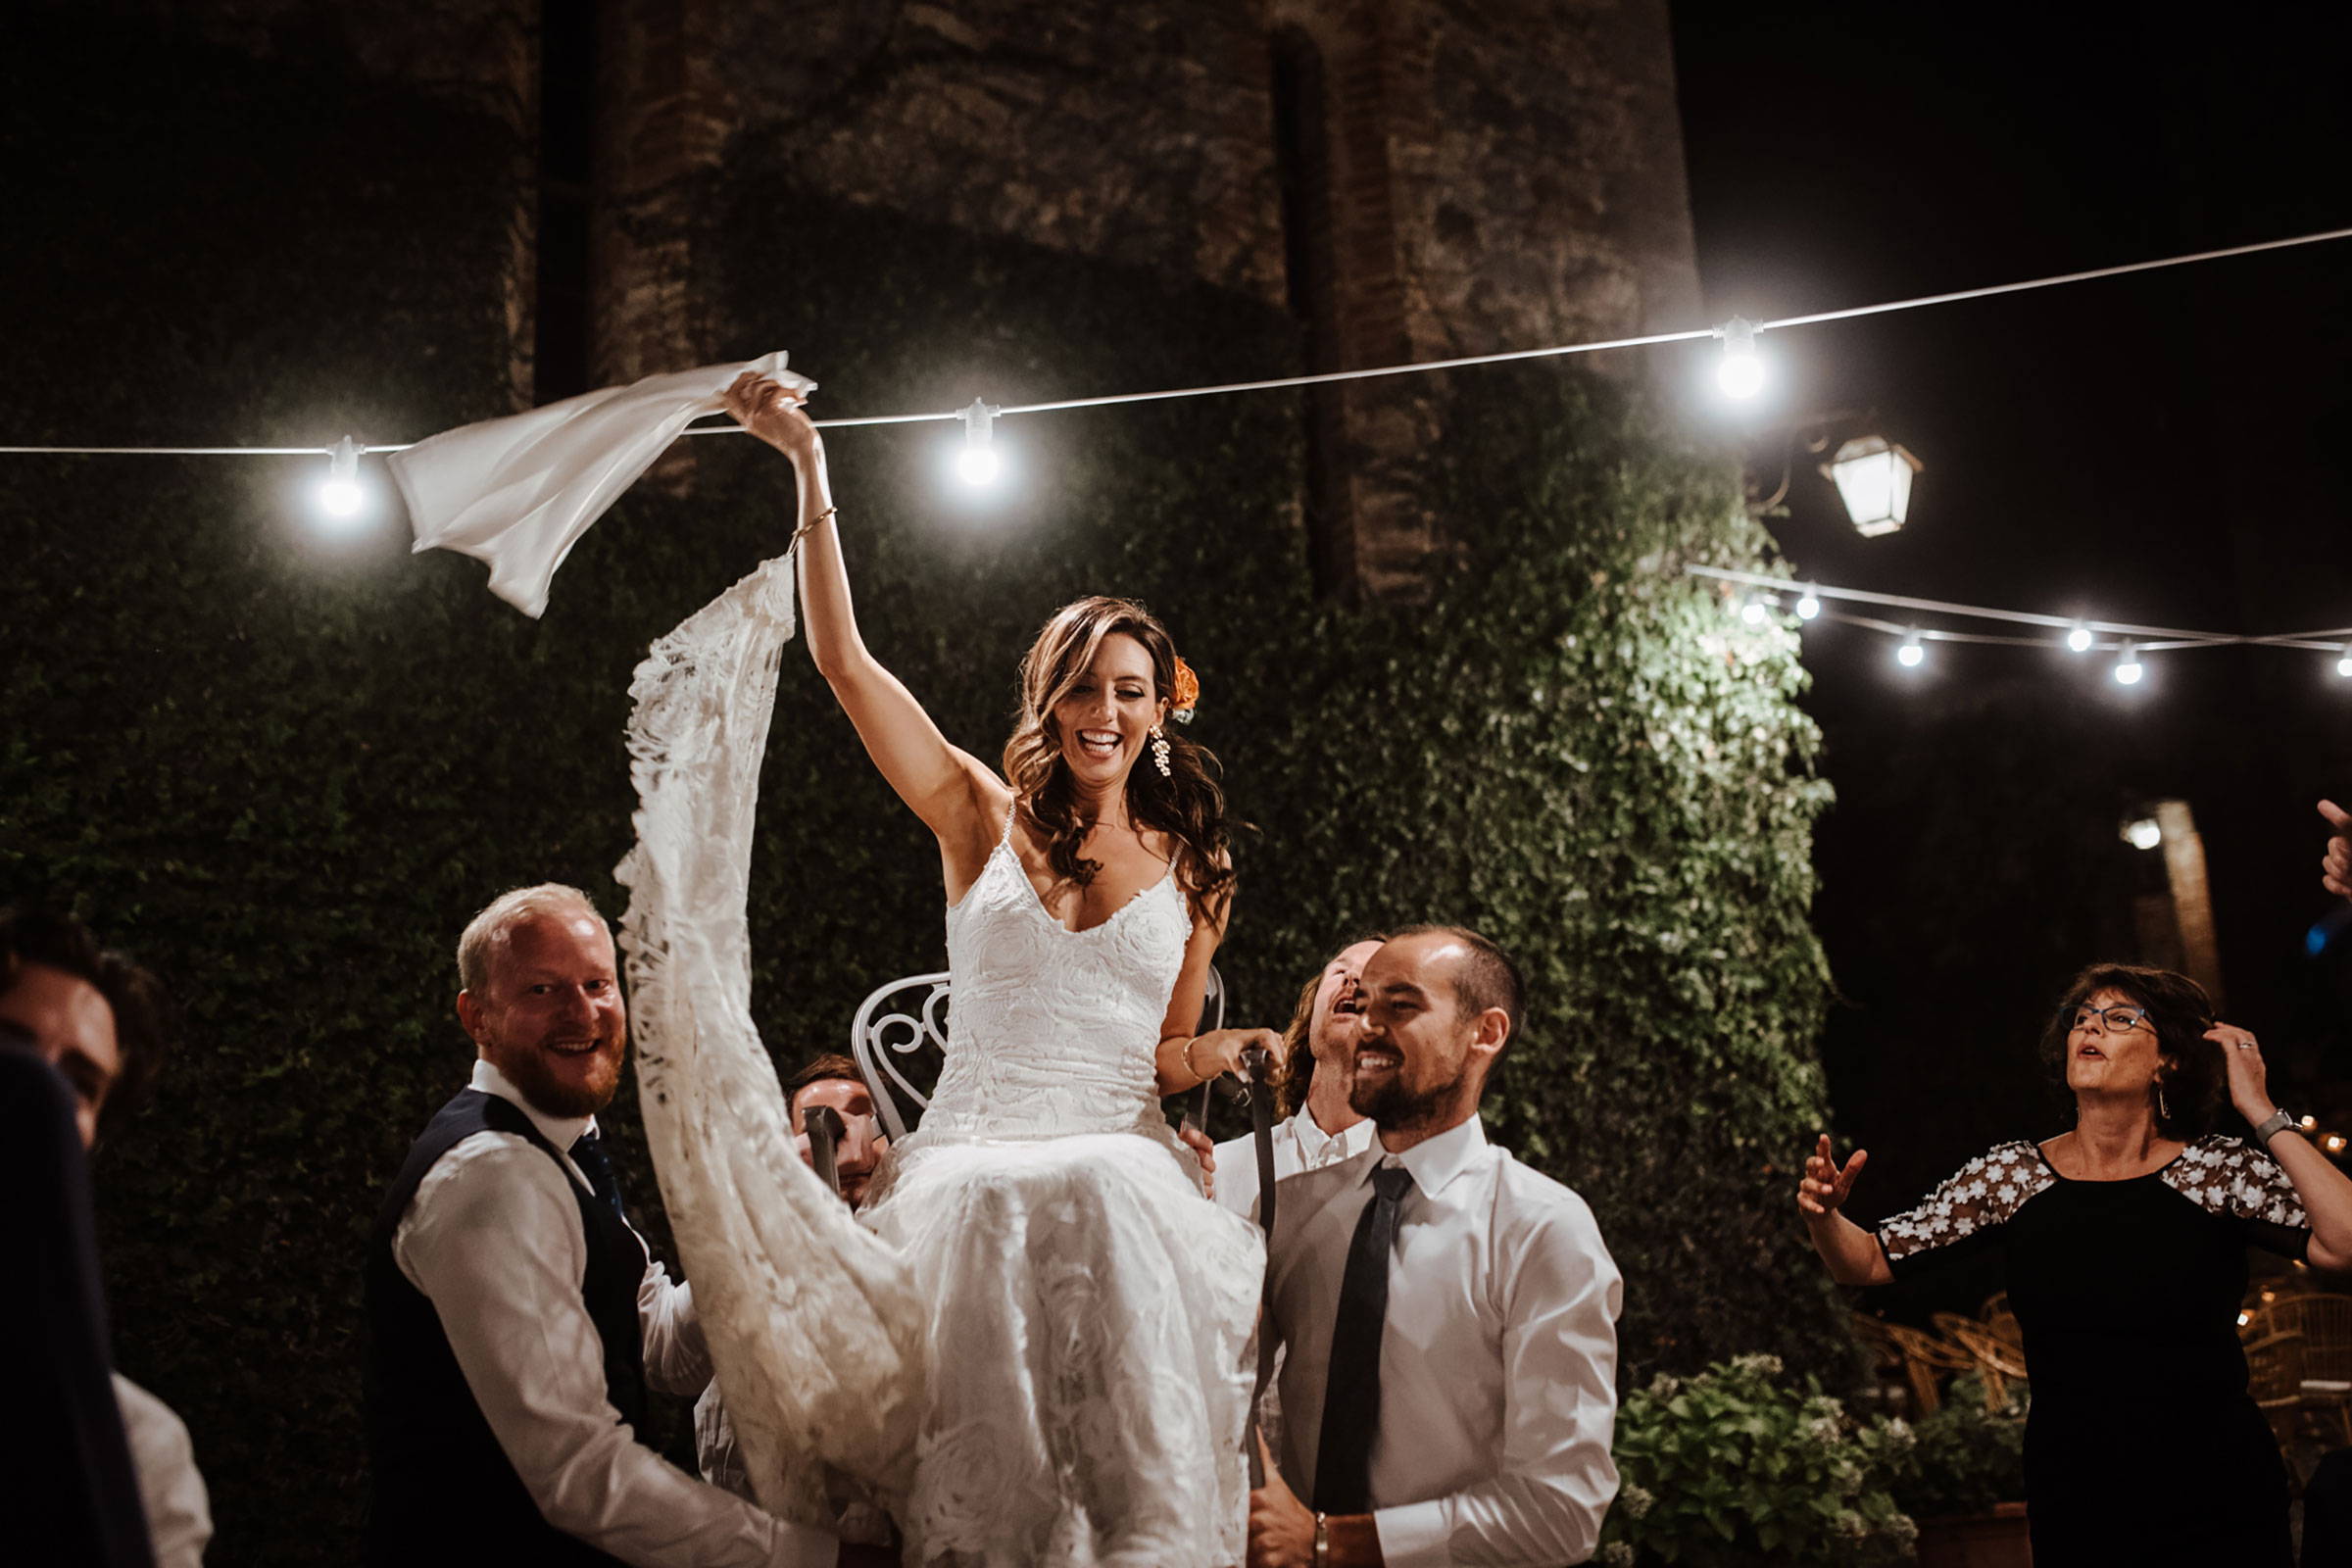 Bride wearing white dress being lifted on a chair by groomsmen